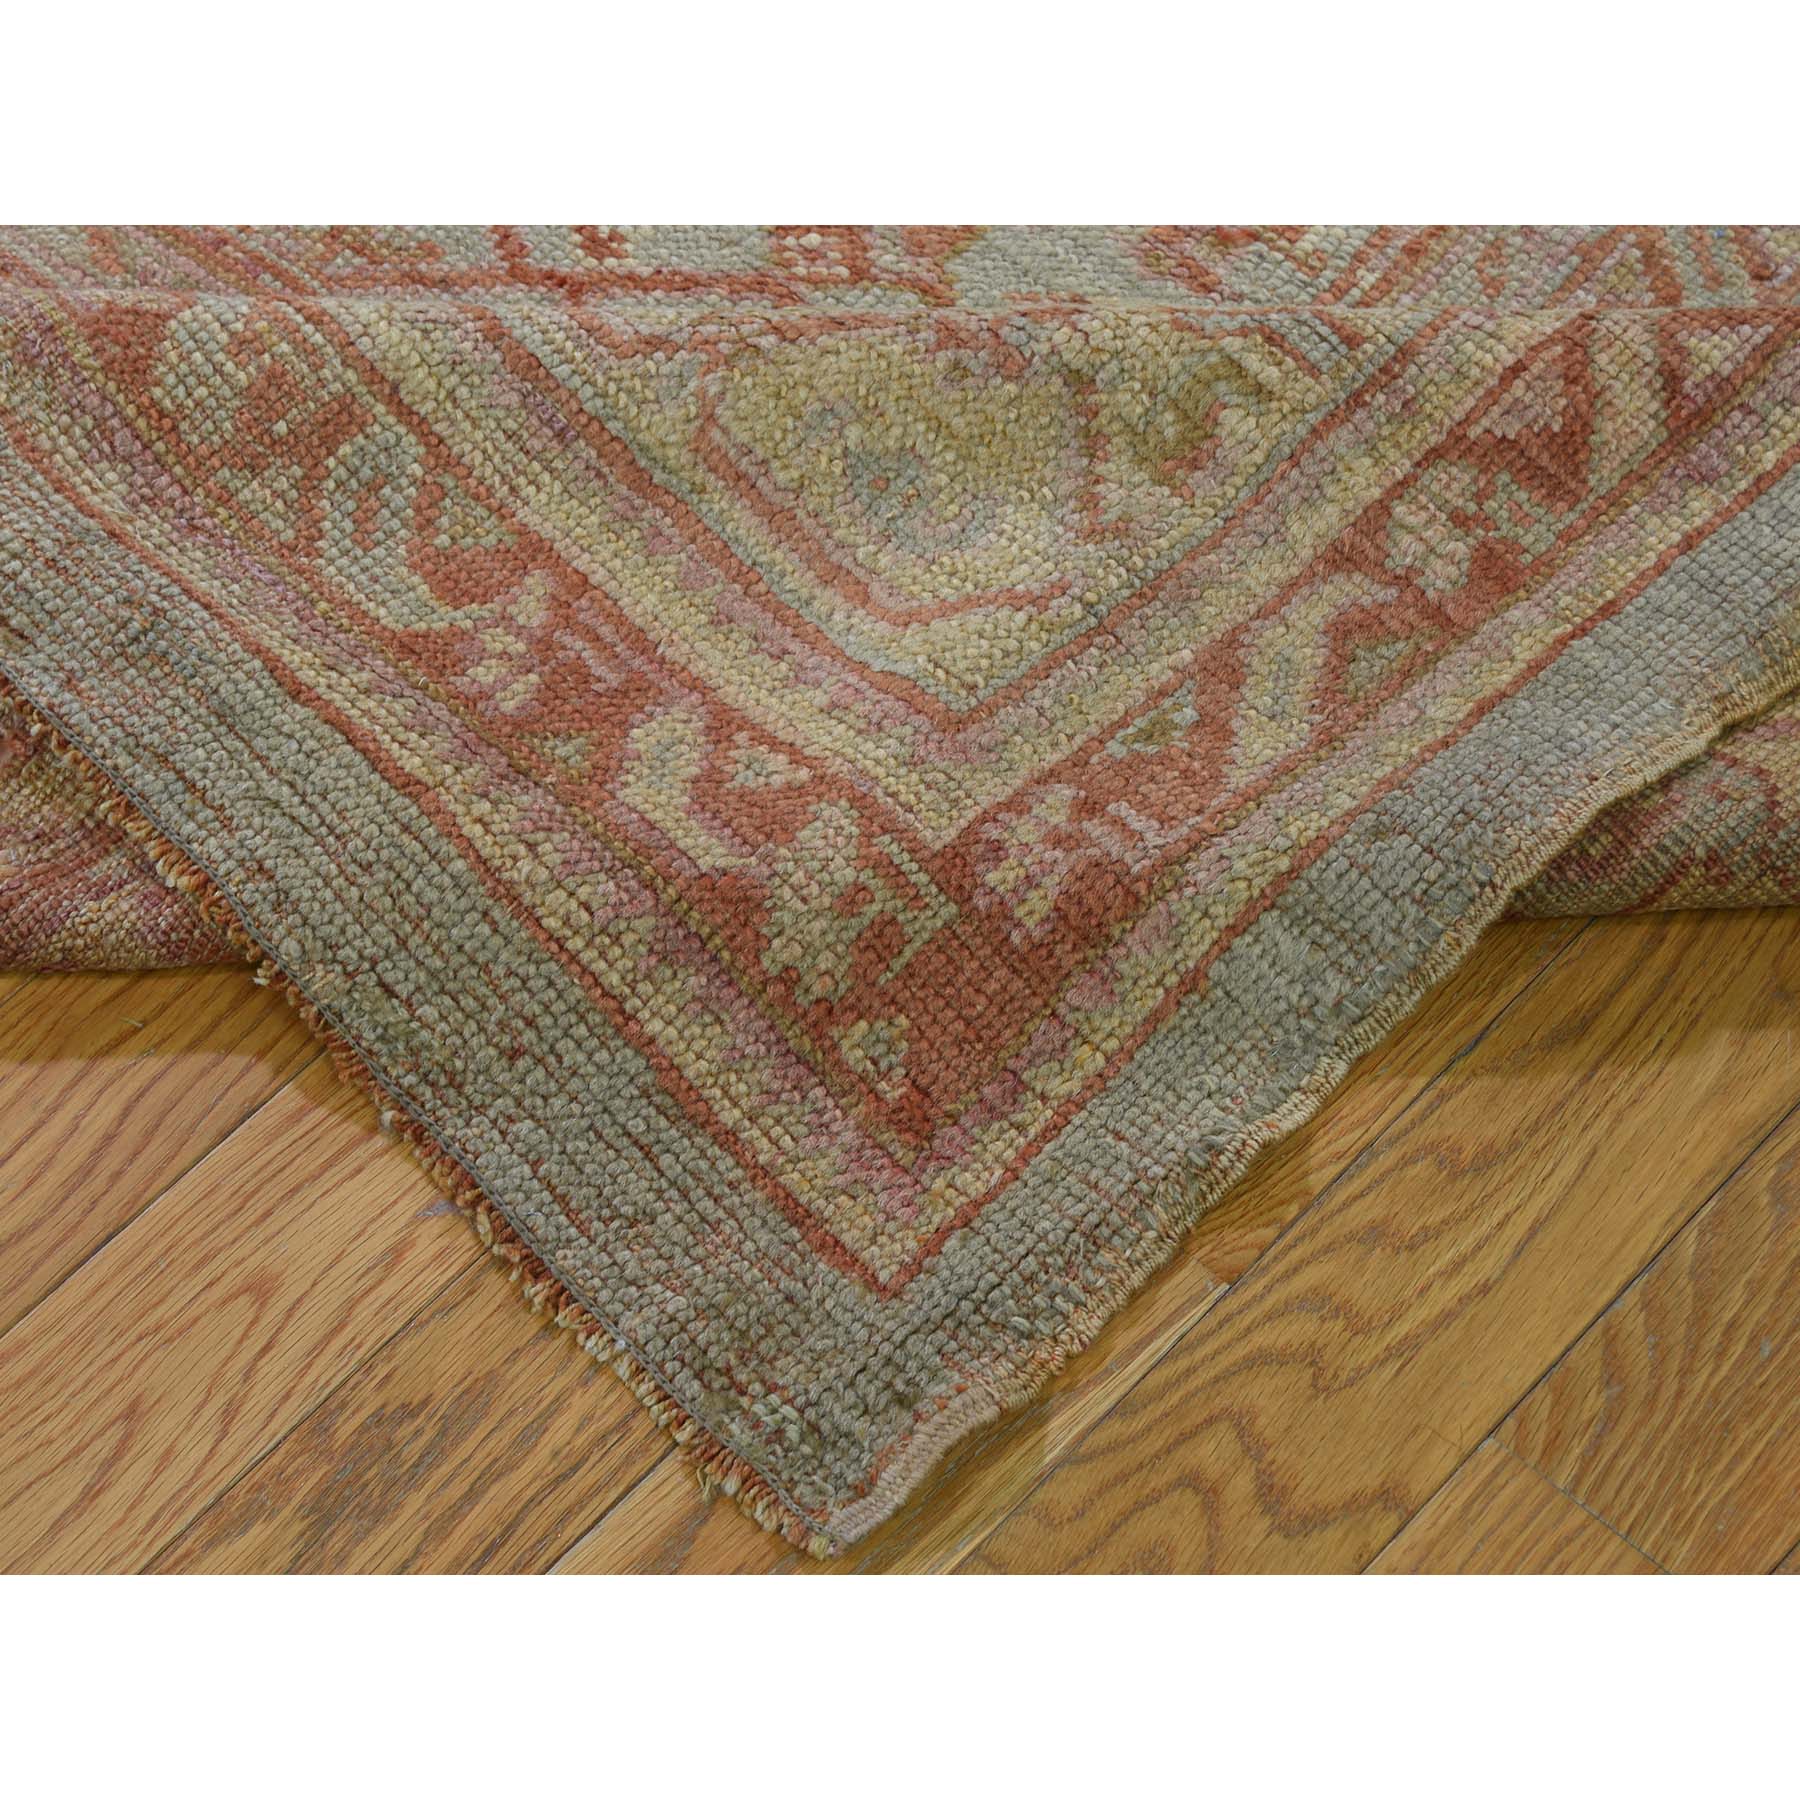 10-10 x15-3  Oversized Antique Turkish Oushak Exc Condition Pure Wool Hand-Knotted Oriental Rug 